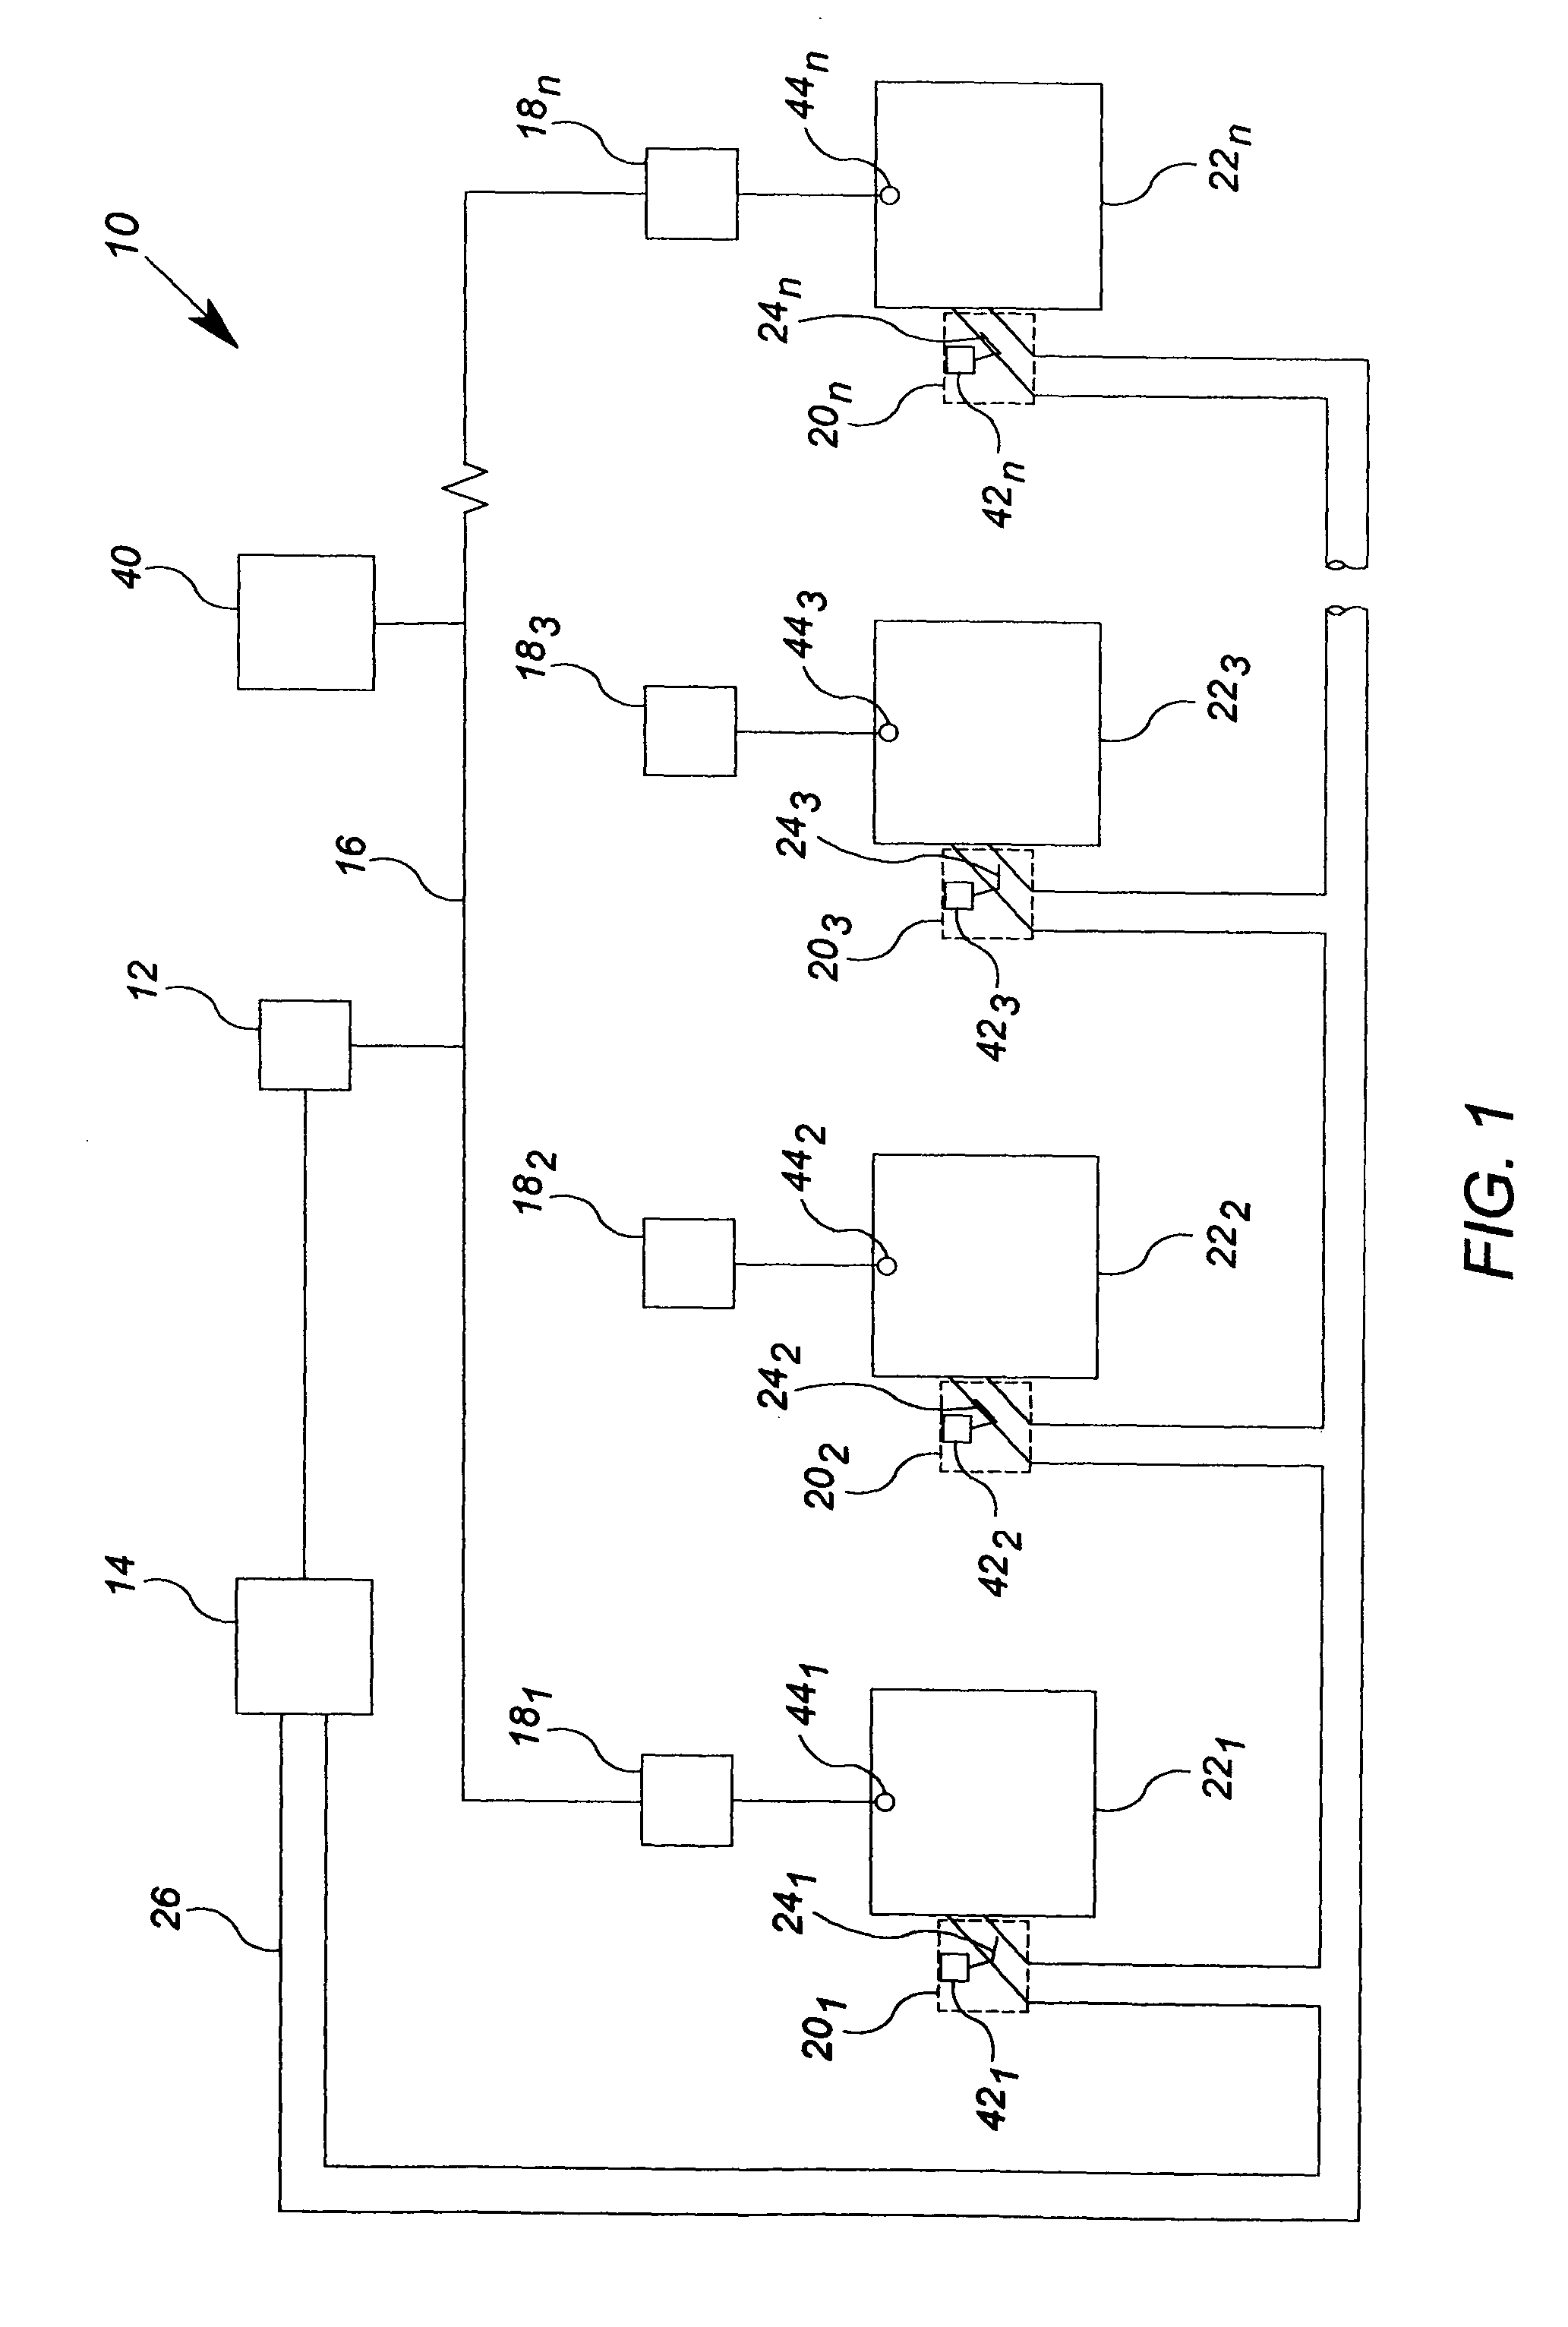 System and method for configuring a network after replacing a node